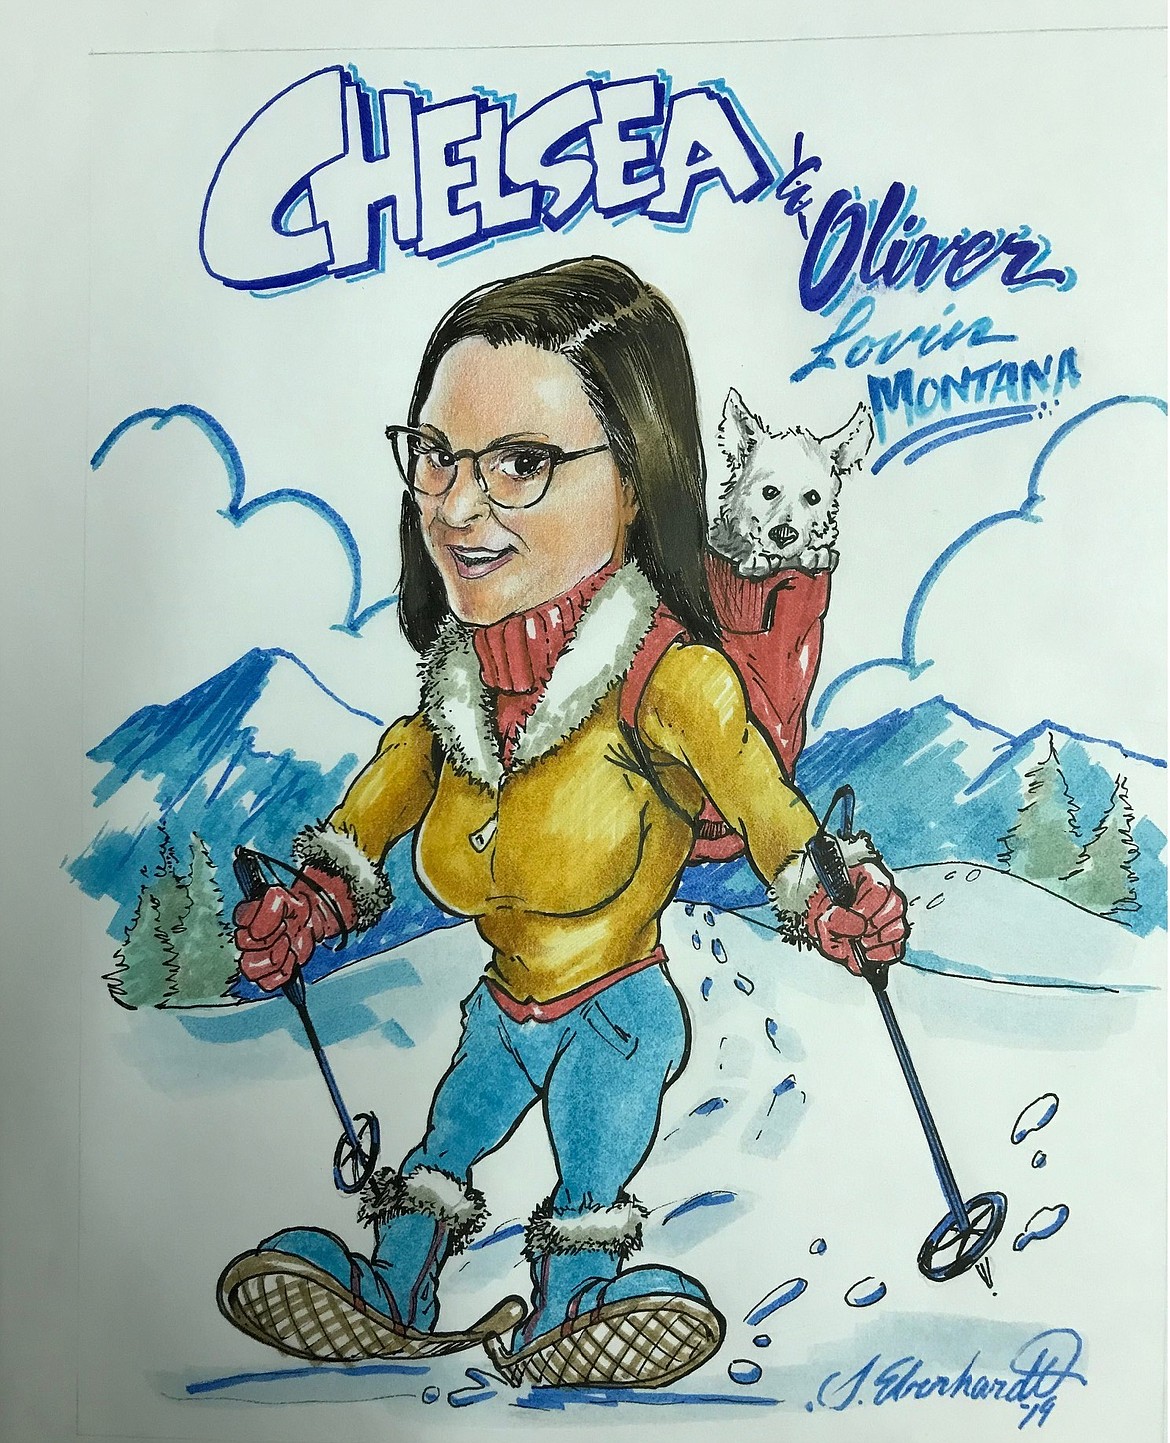 THIS CARICATURE was created by Steve Eberhardt for &#147;Chelsea &amp; Oliver,&#148; who won a drawing during the Sanders County Arts Council&#146;s Bunkhouse, Beans and Bacon fundraiser March 9 at the Thompson Falls VFW.